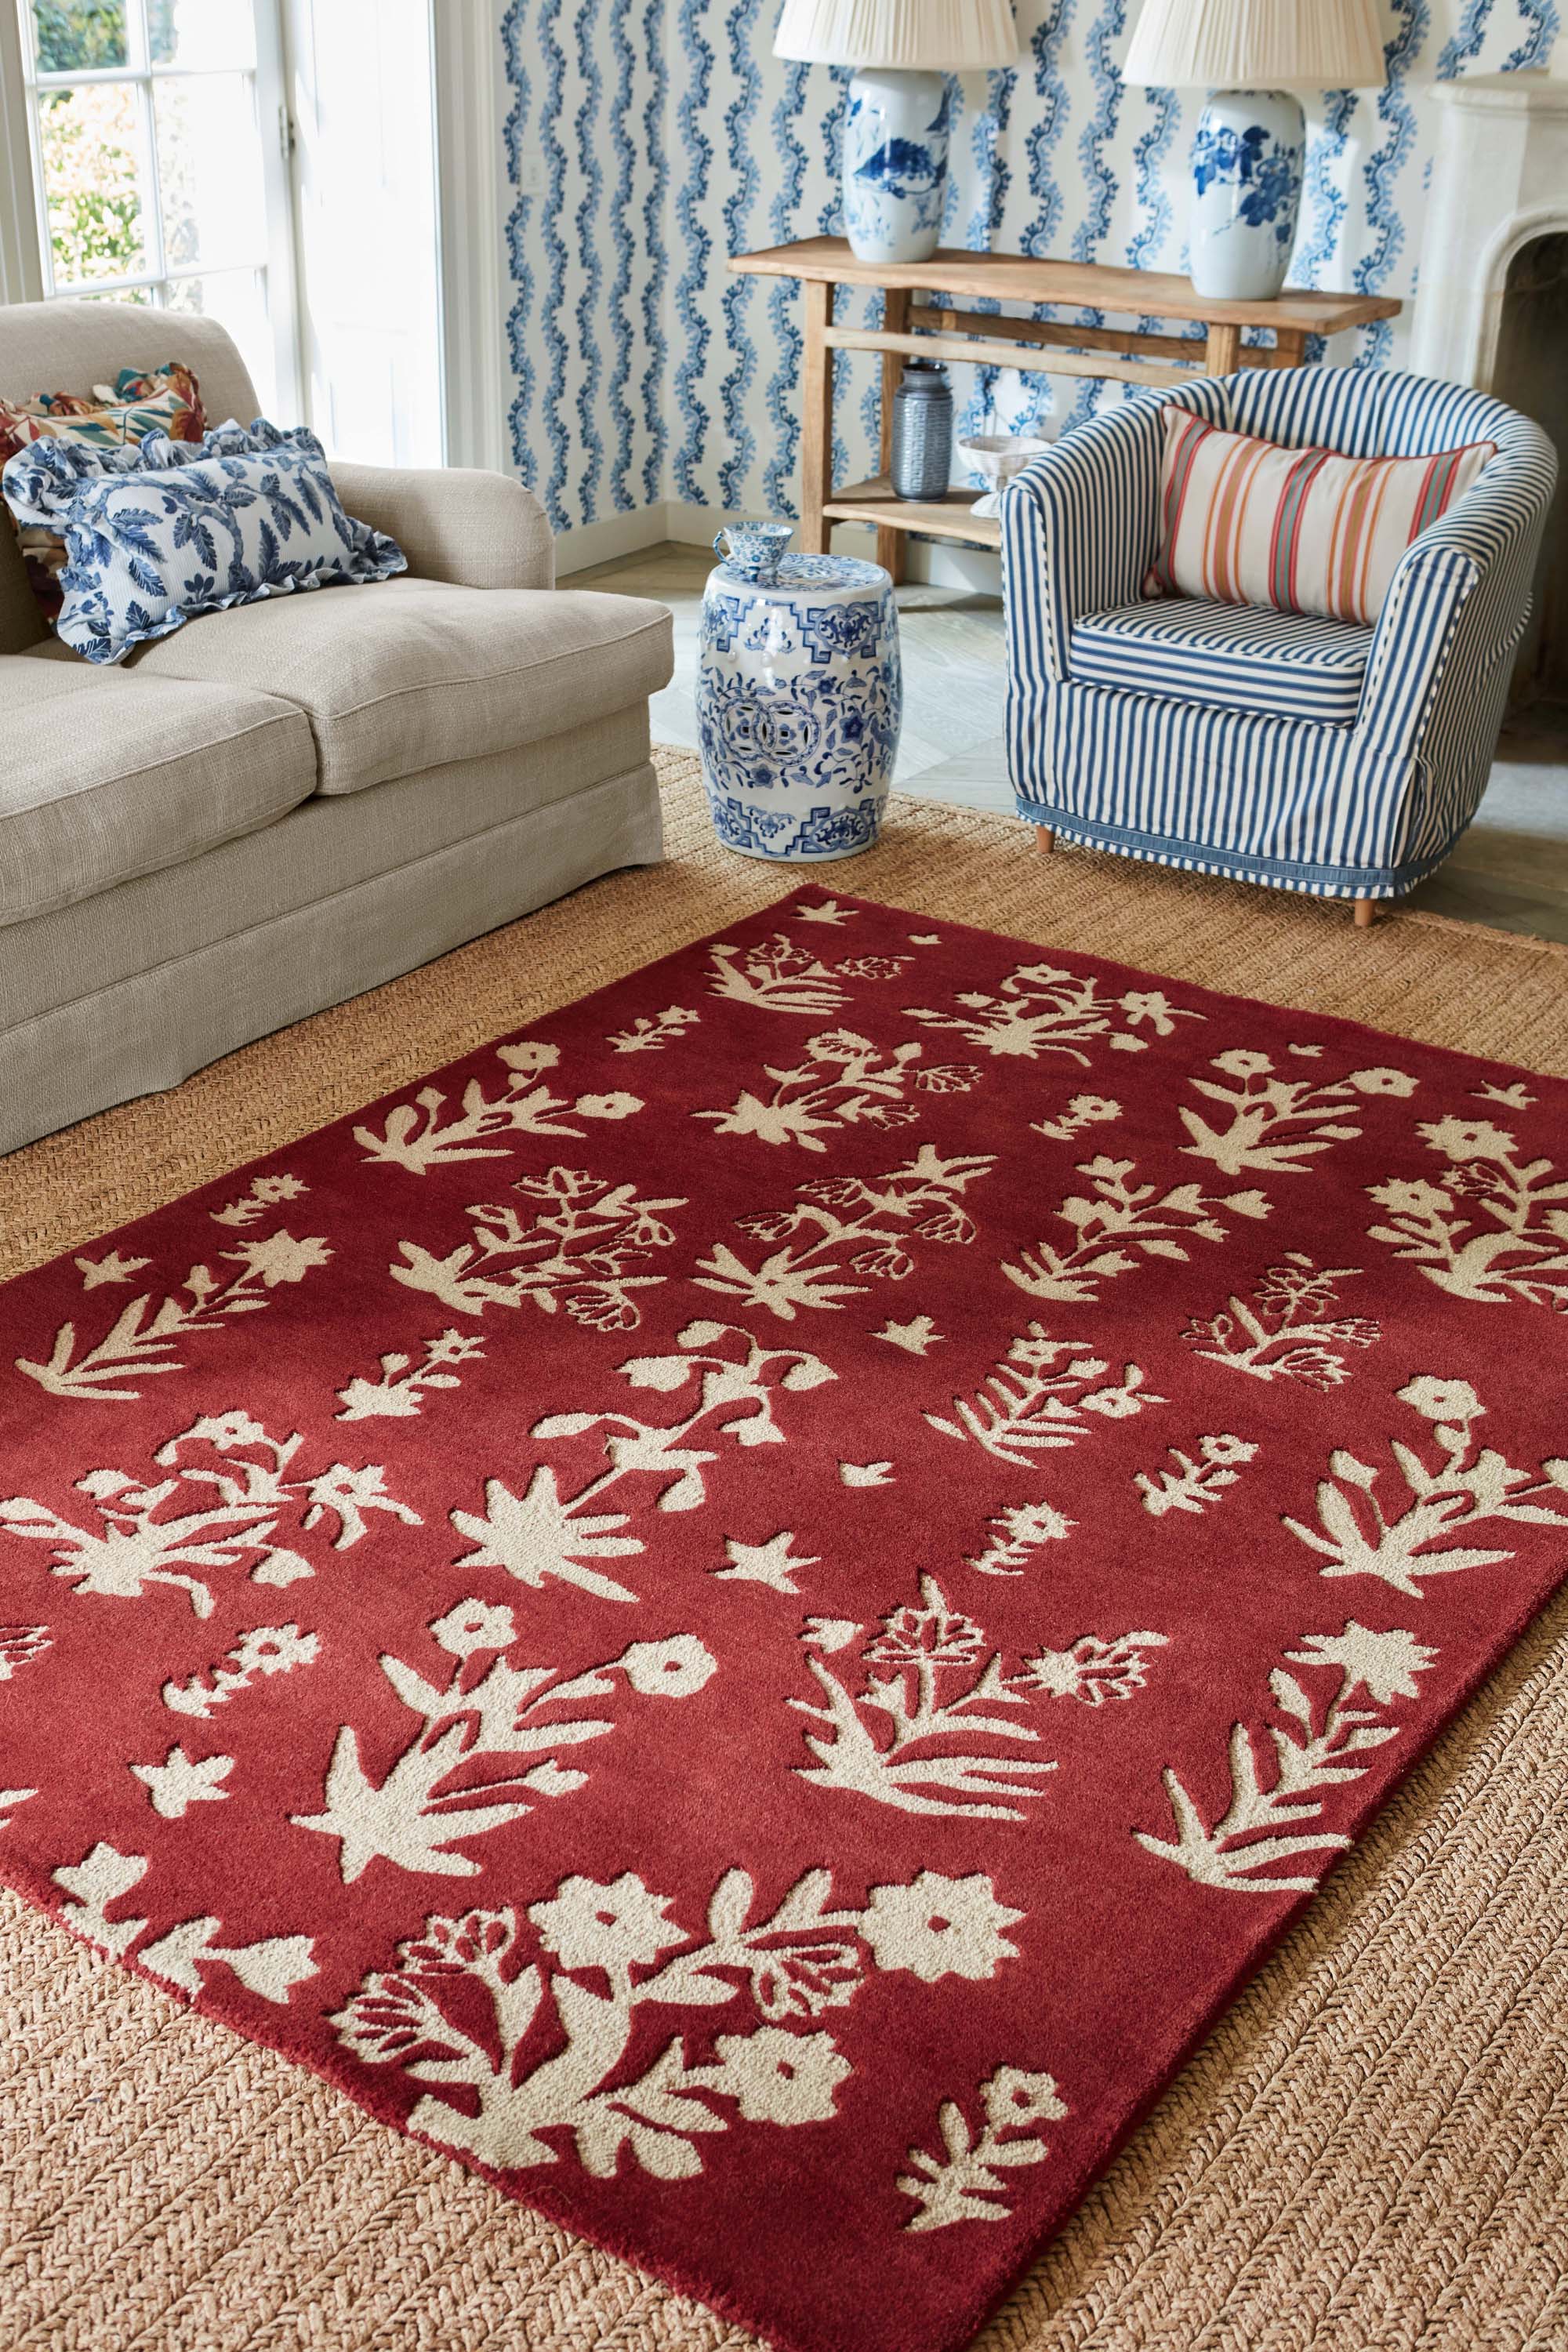 Red rug with cream floral motif